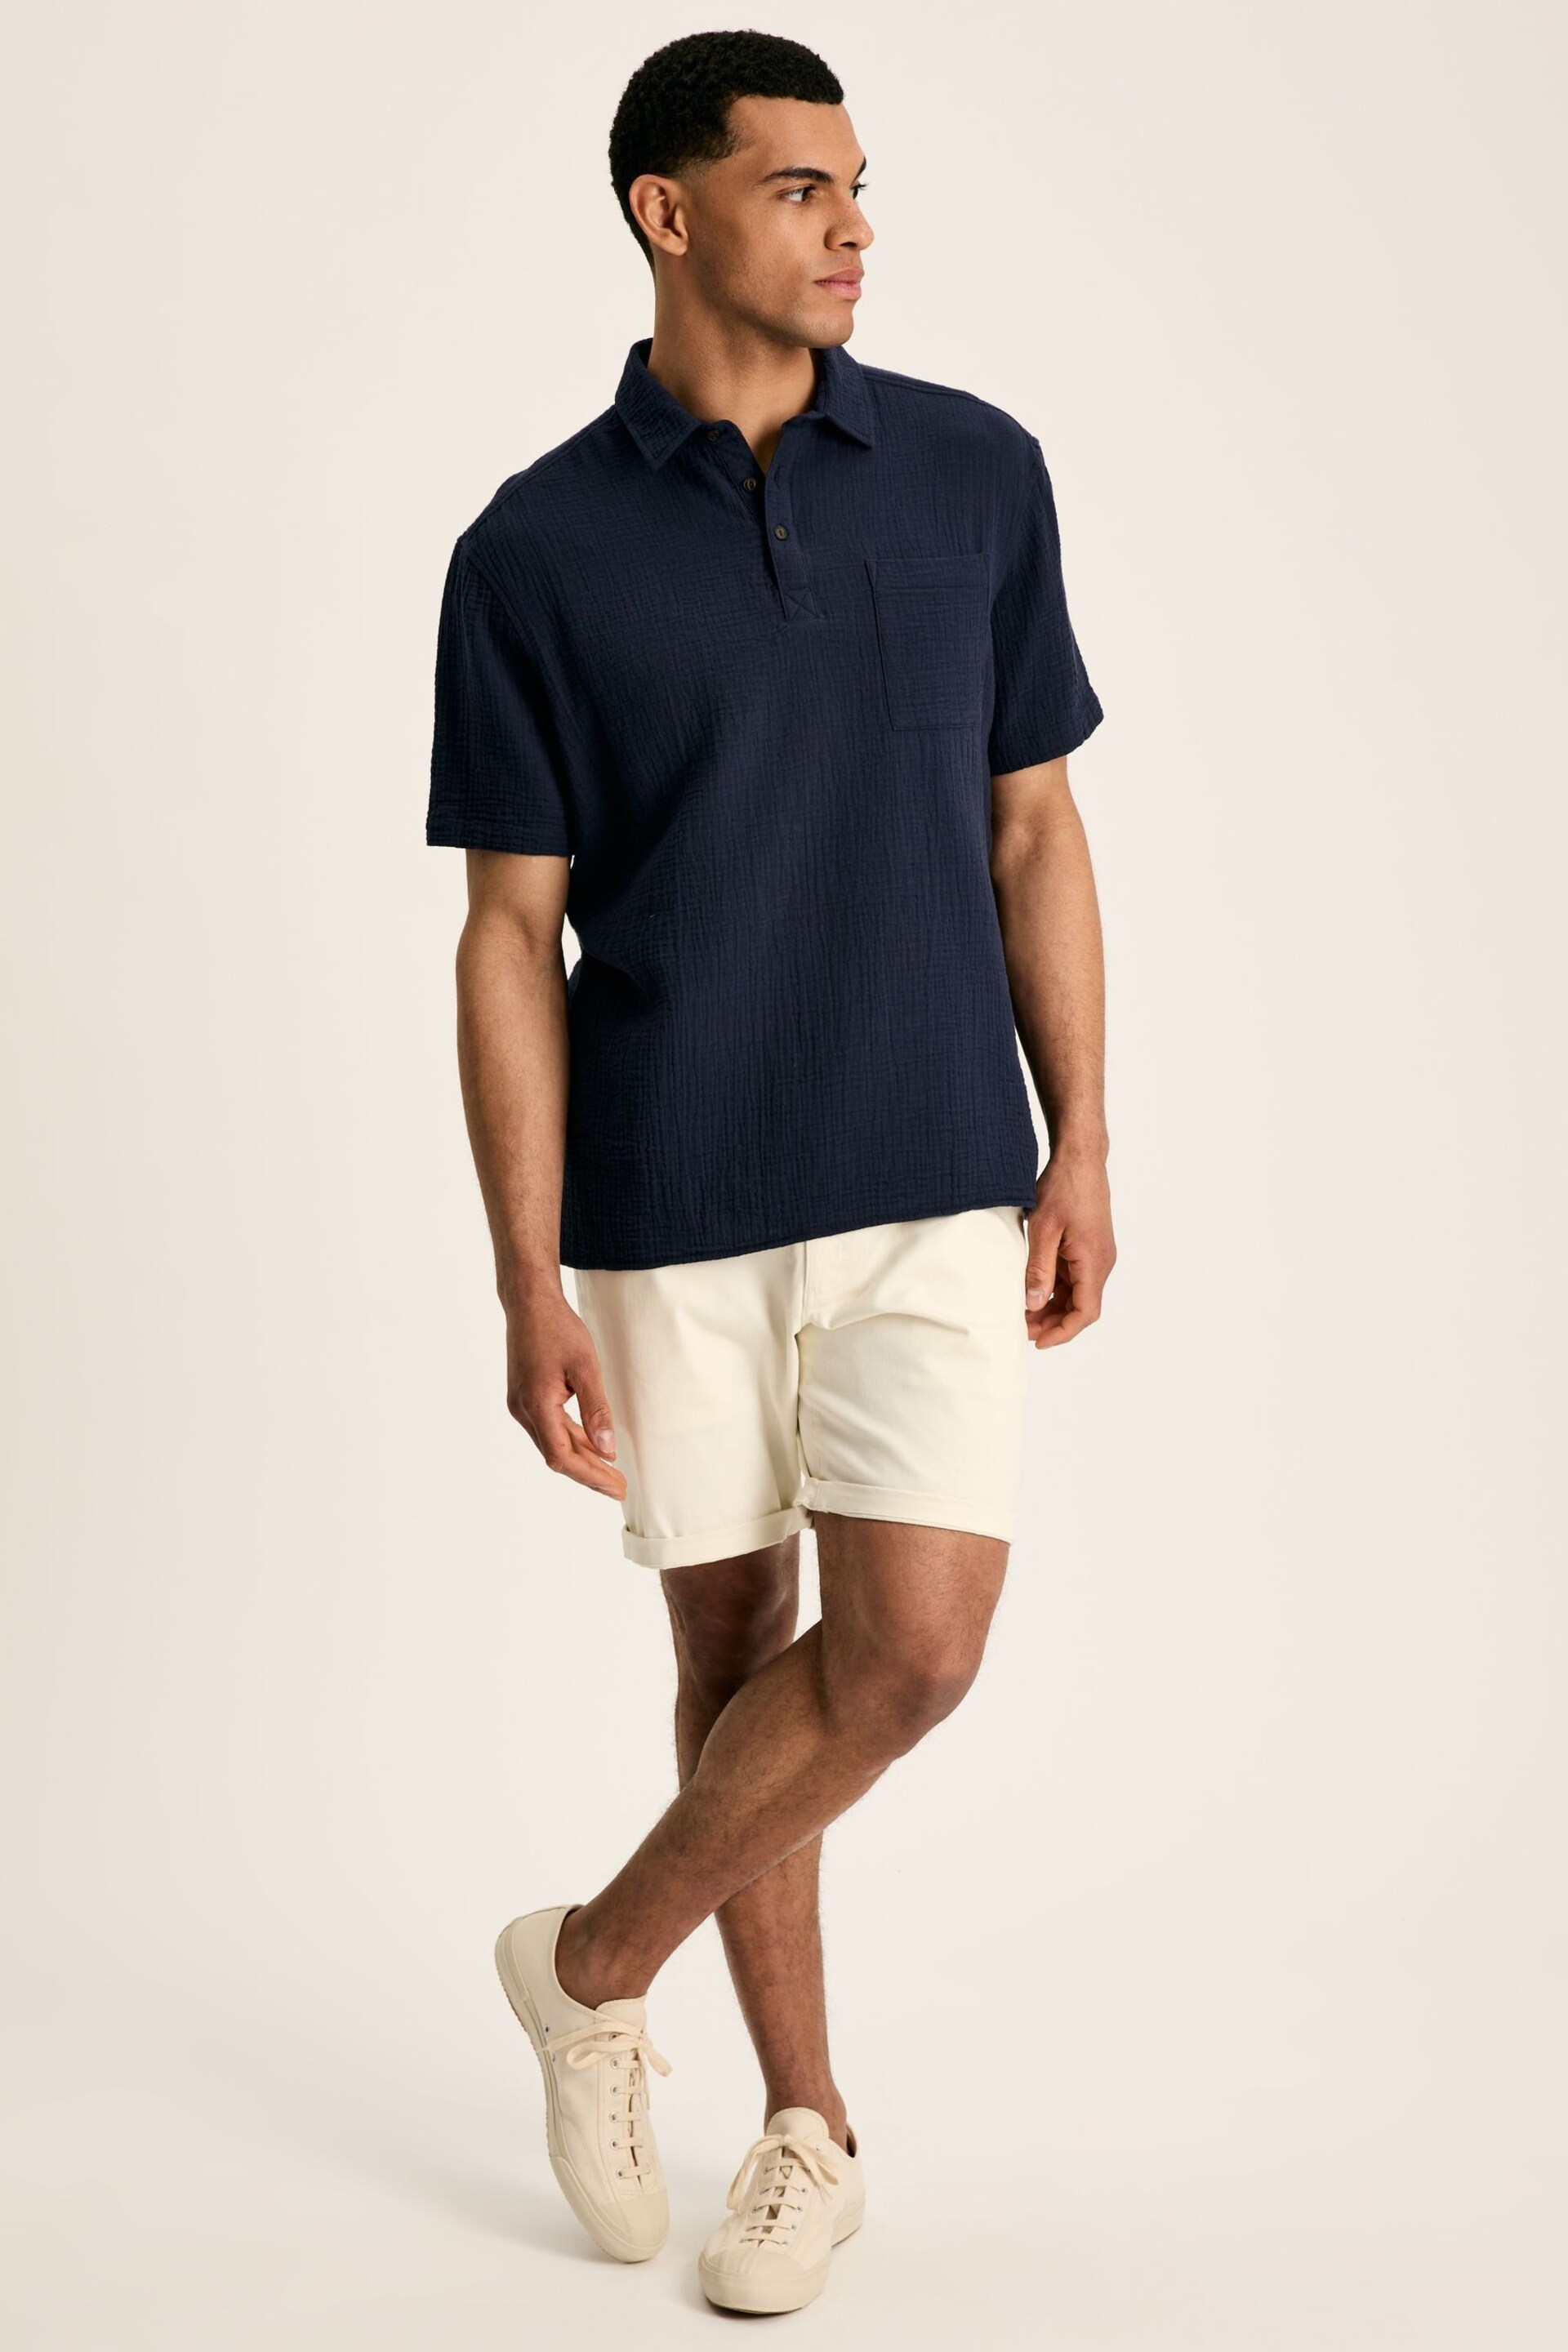 Joules Cheesecloth Navy Blue Popover Short Sleeve Shirt - Image 5 of 9